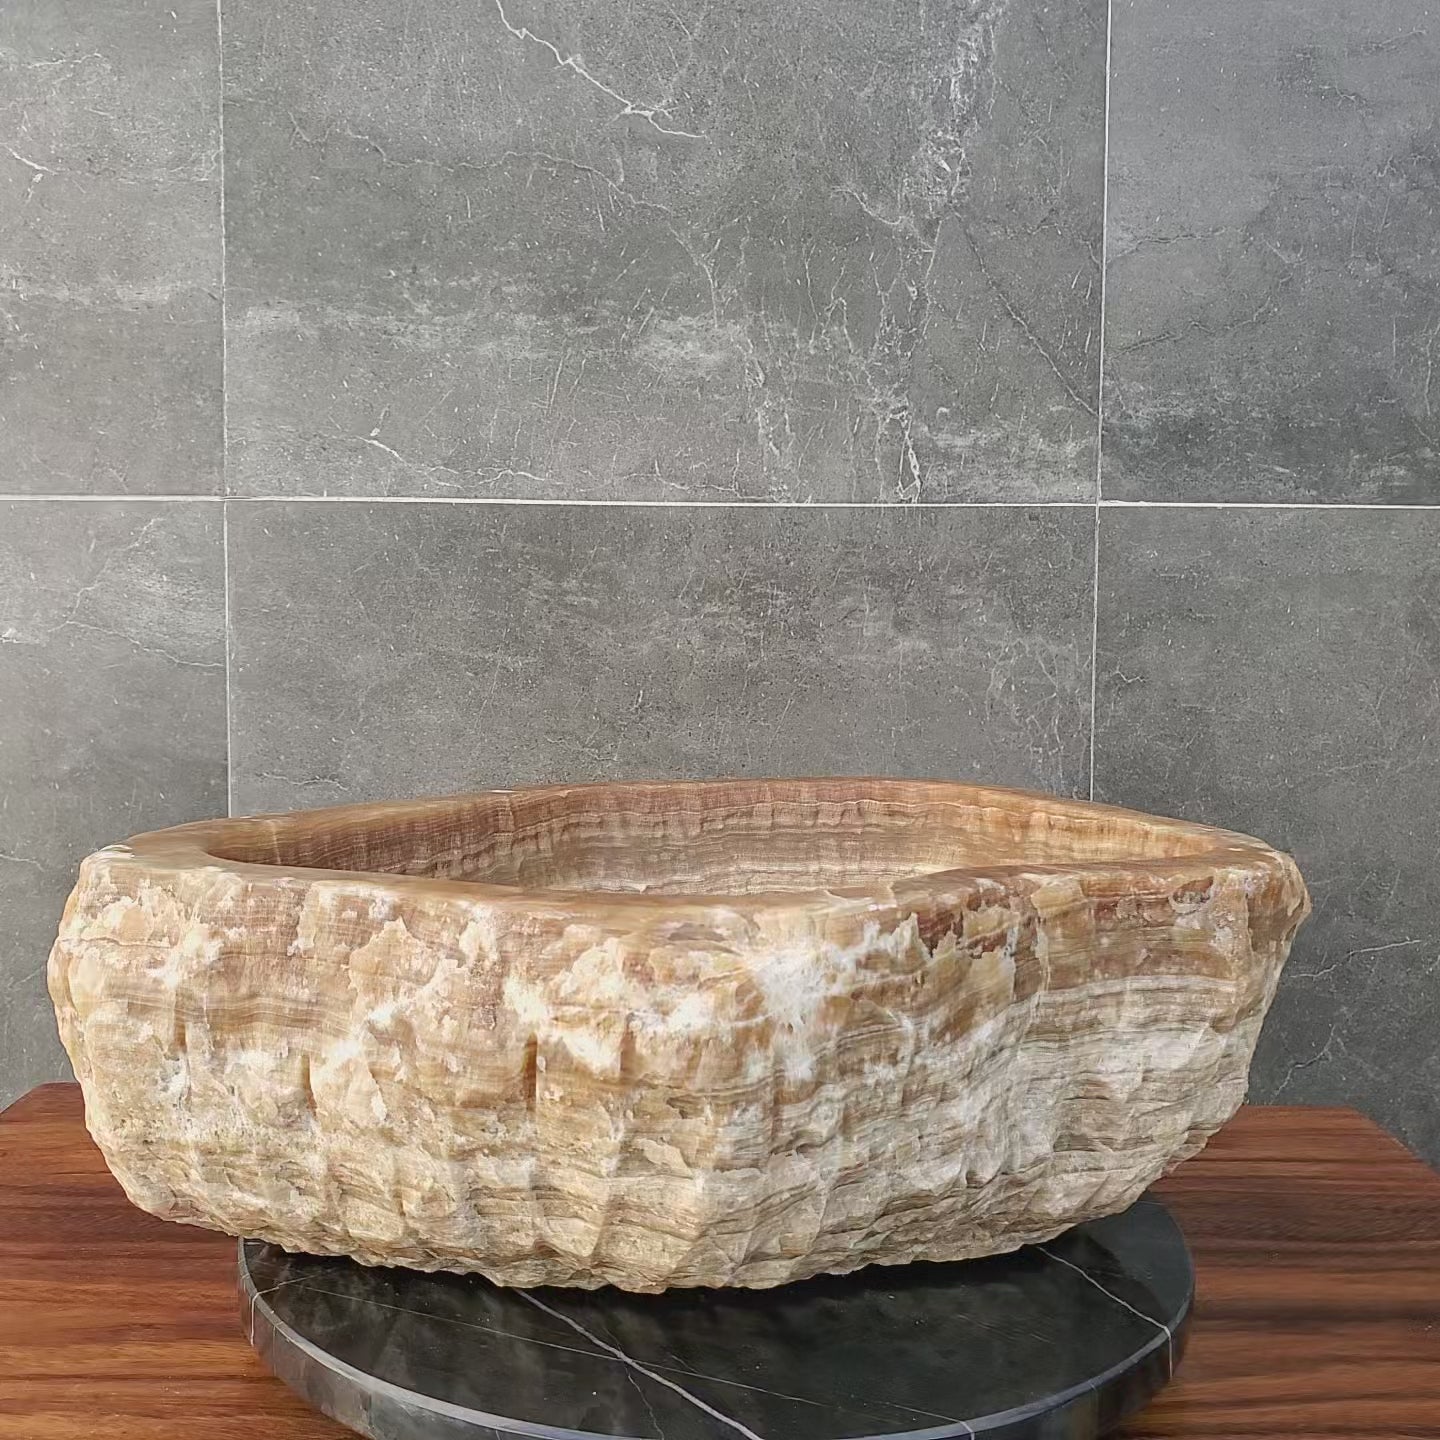 White and Brown Onyx Stone Vessel Sink. It is one of a kind. A beautiful work of art. Handmade in Mexico. Hand Finished in the USA. Ships from the USA. A beautiful work of art. Buy now at www.felipeandgrace.com. 